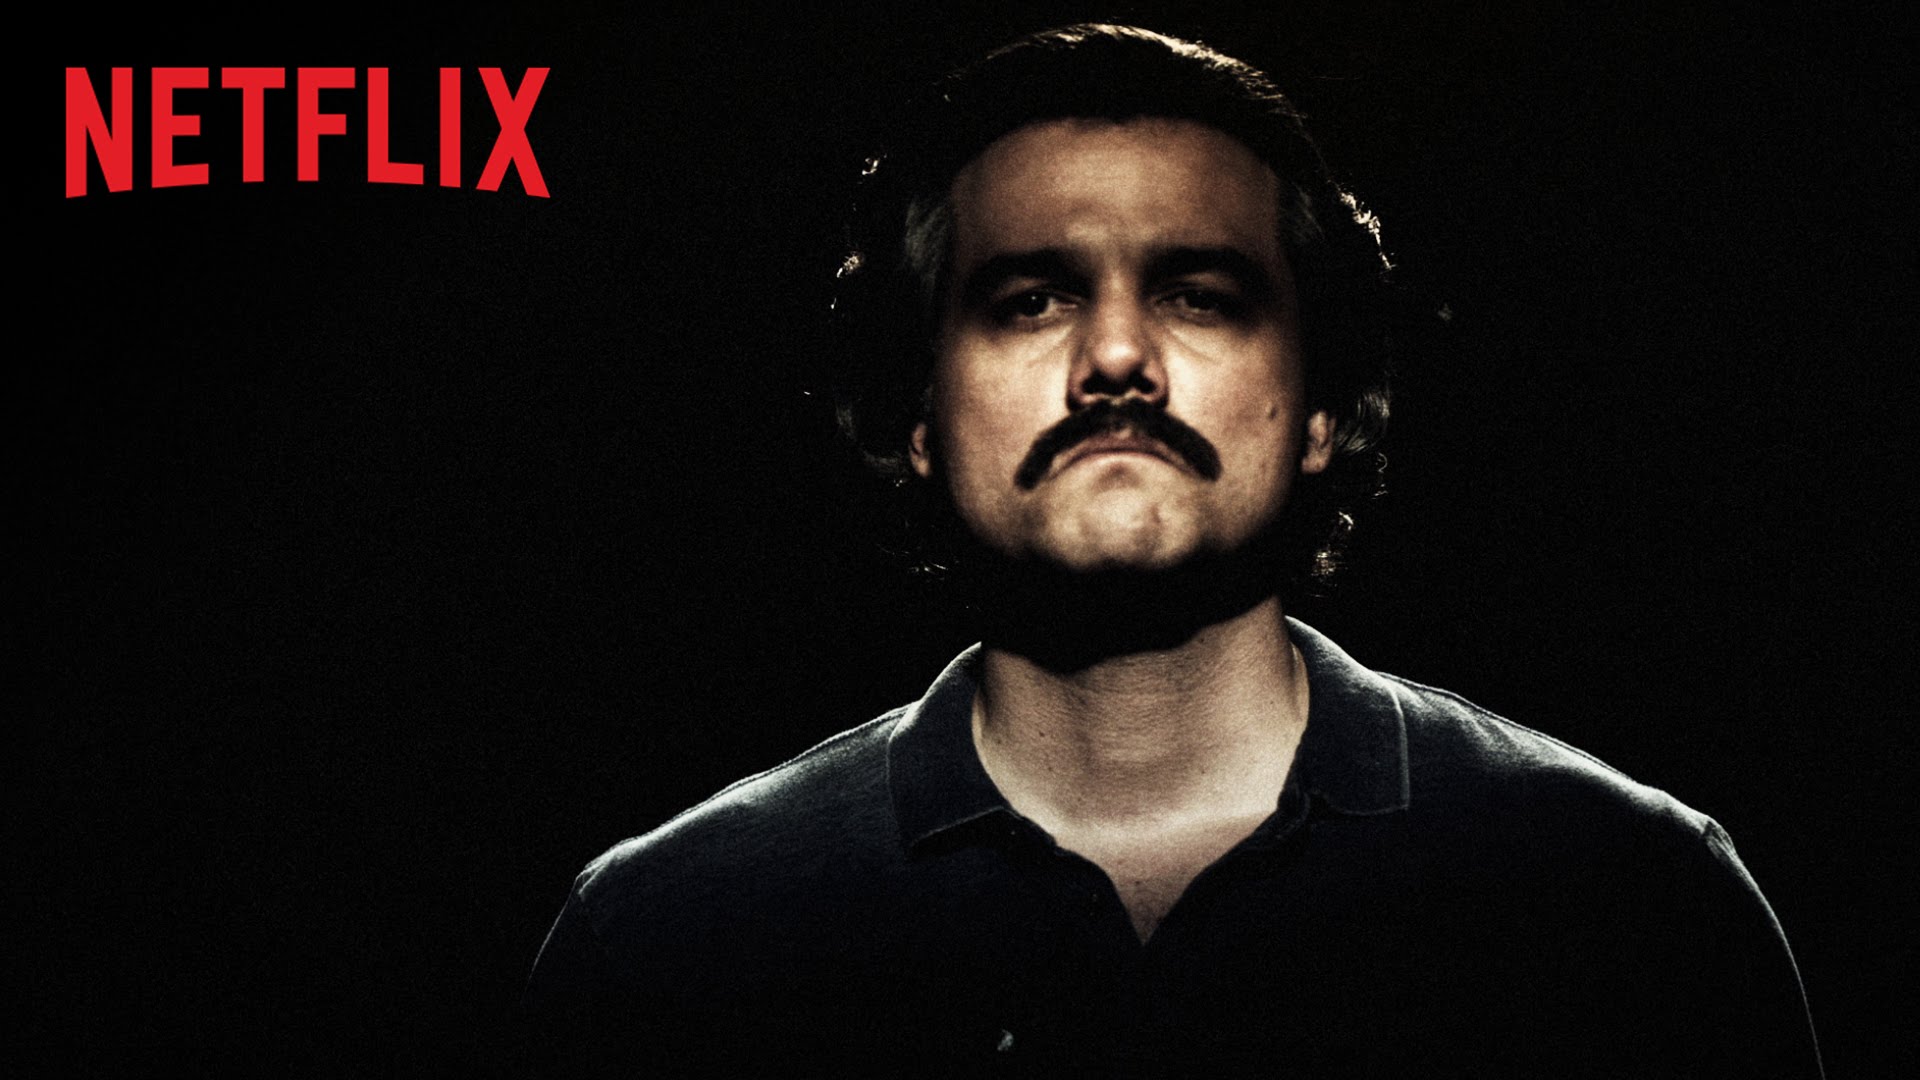 Netflix Releases Trailer for Narcos Season 2